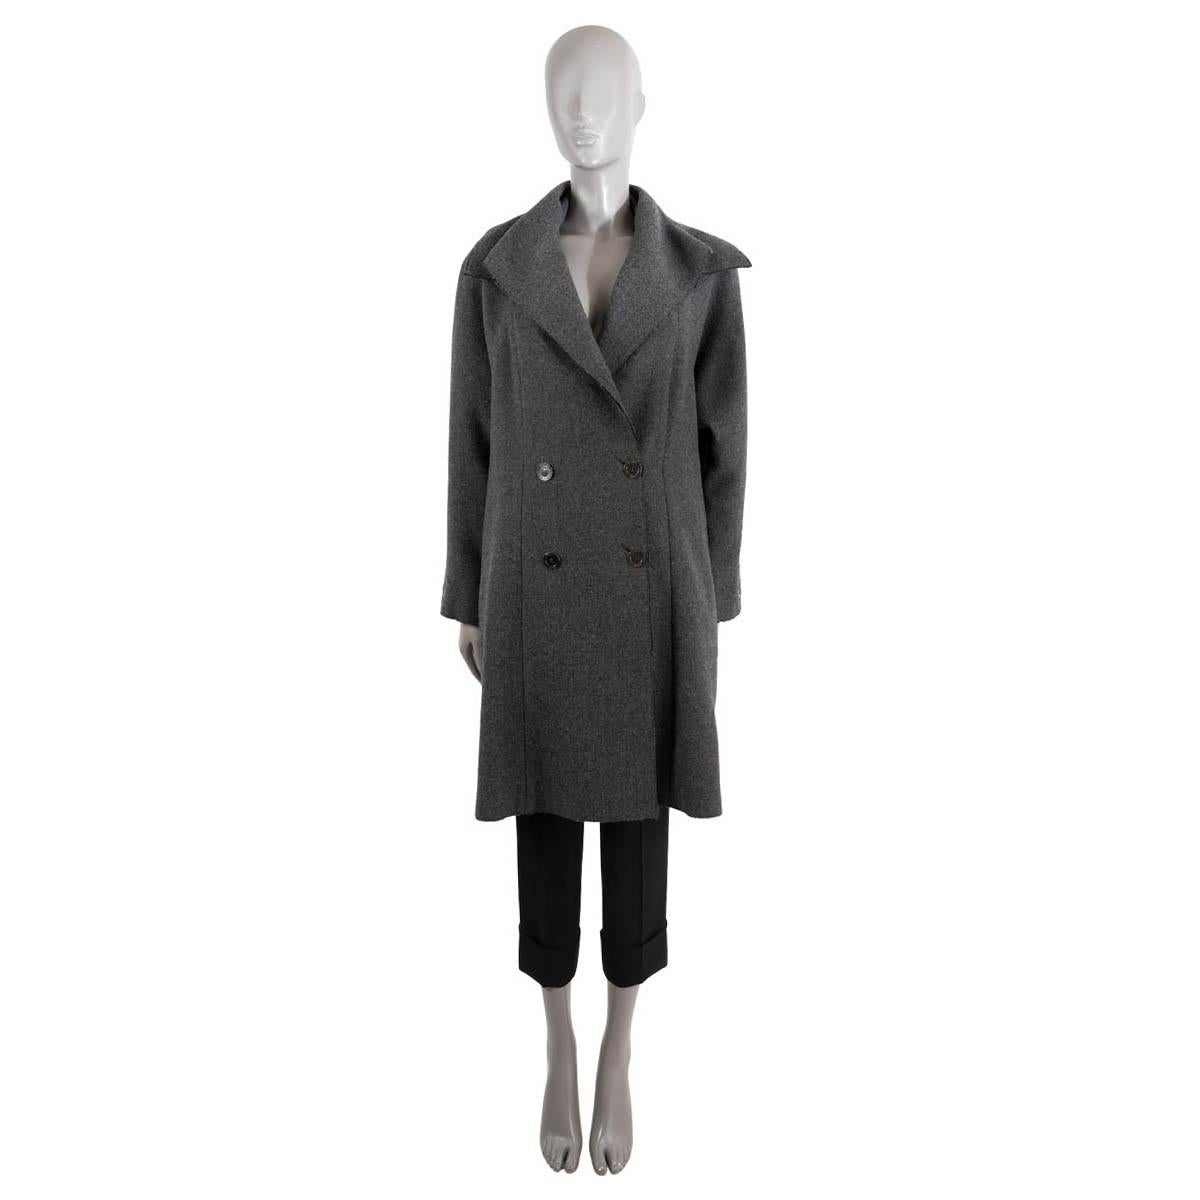 100% authentic Chanel double breasted coat in anthracite grey wool (100%). The design features a wide collar, slit pockets on the side, open hem details and a slightly flared silhouette. Lined in anthracite silk (100%). Has been worn and is in